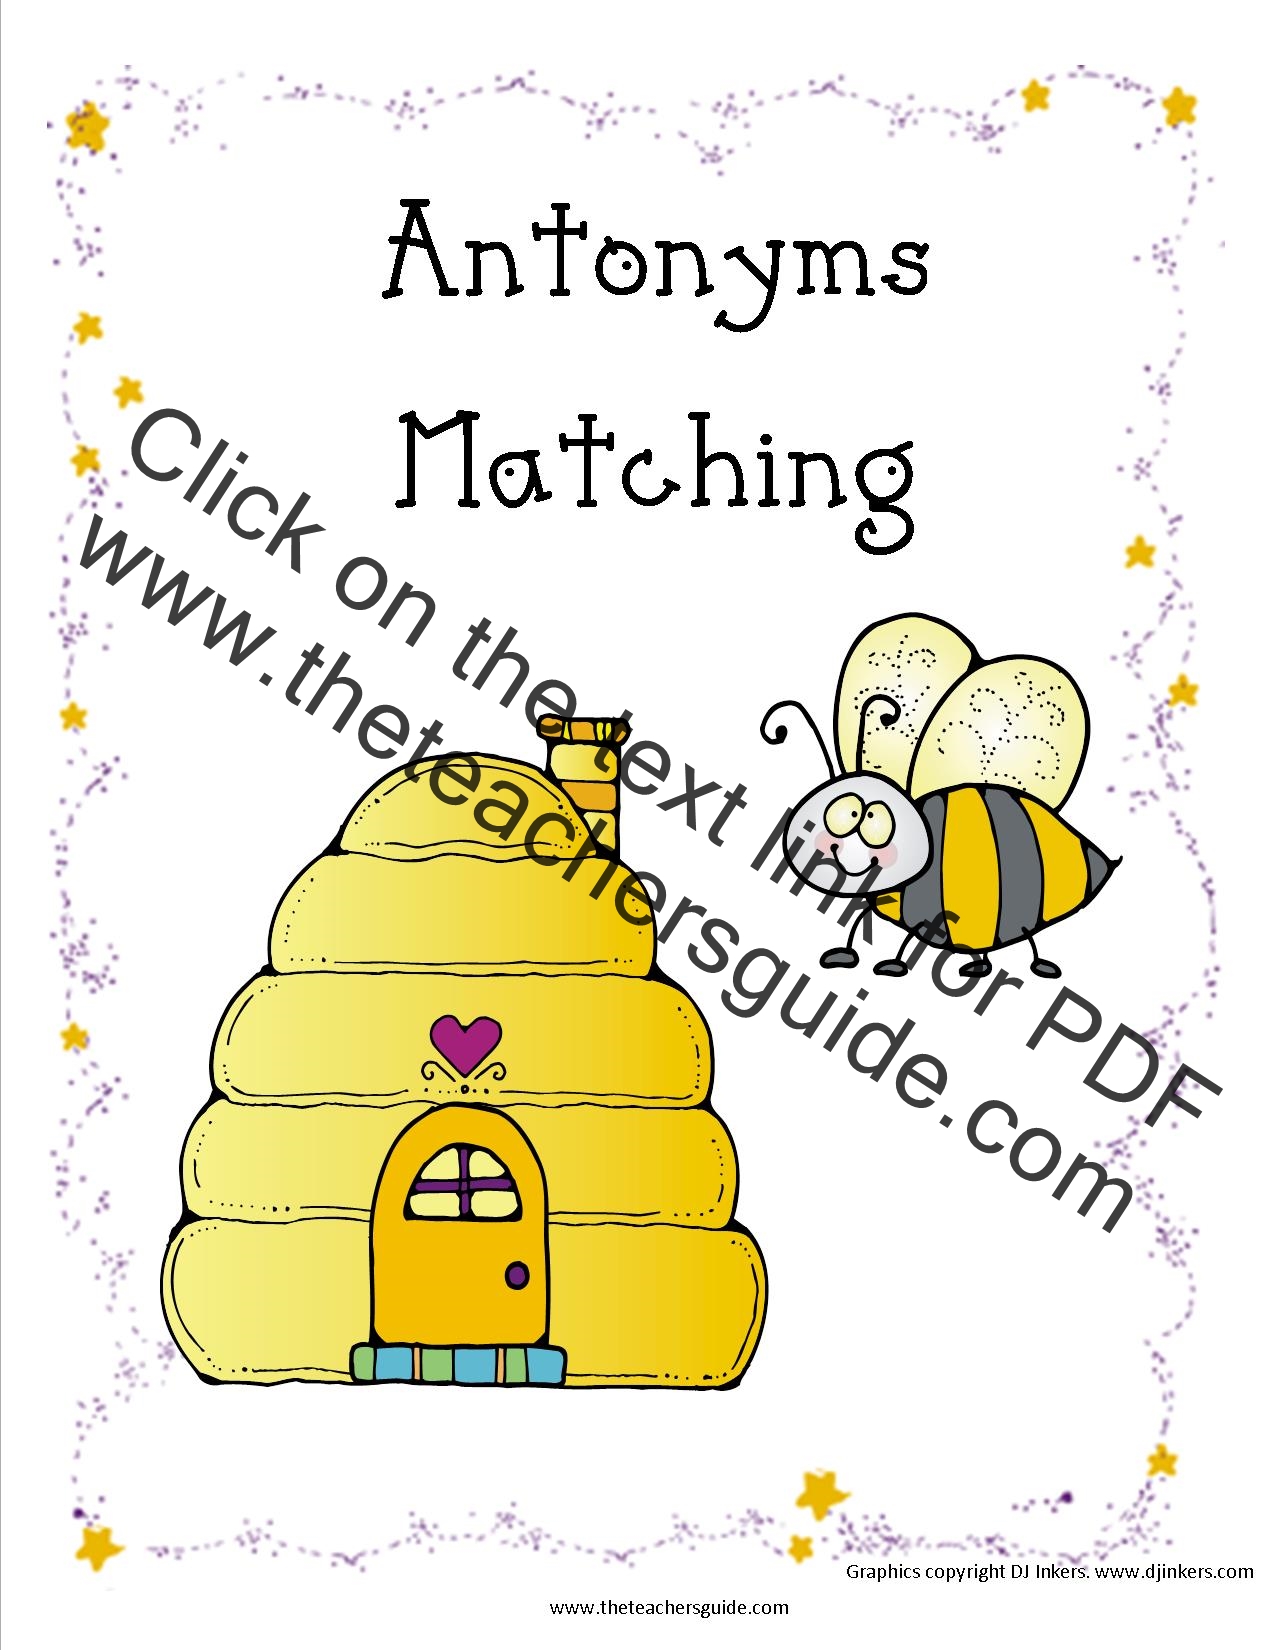 antonyms-and-synonyms-worksheets-from-the-teacher-s-guide